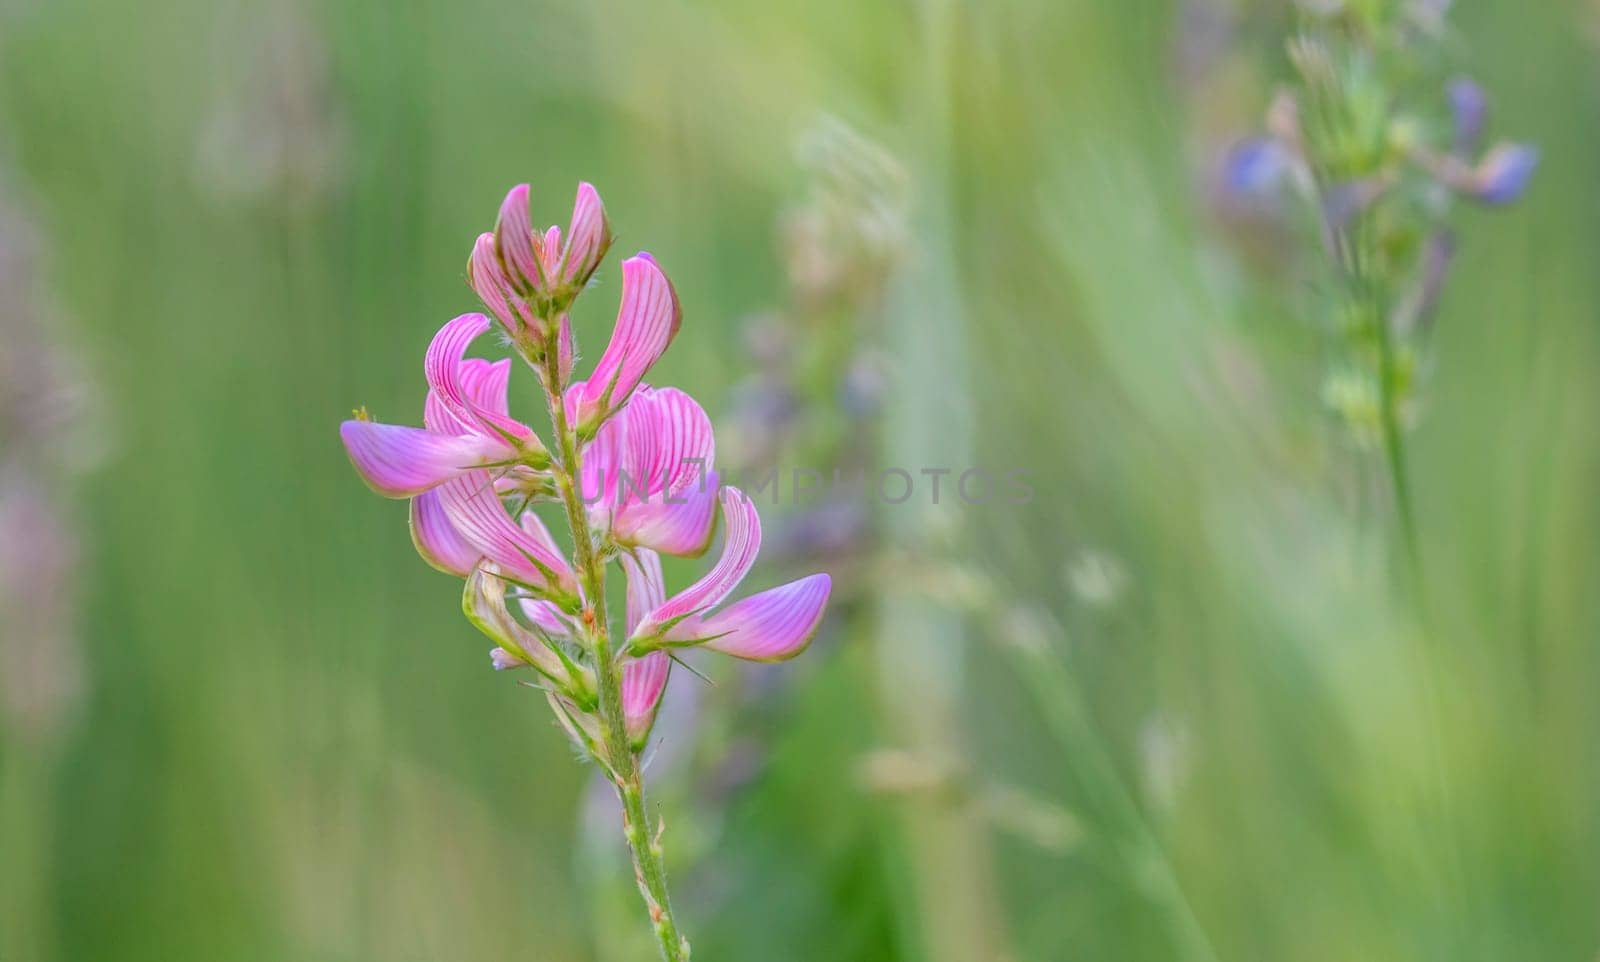 Common sainfoin, Onobrychis viciifolia or sativa flower in green background